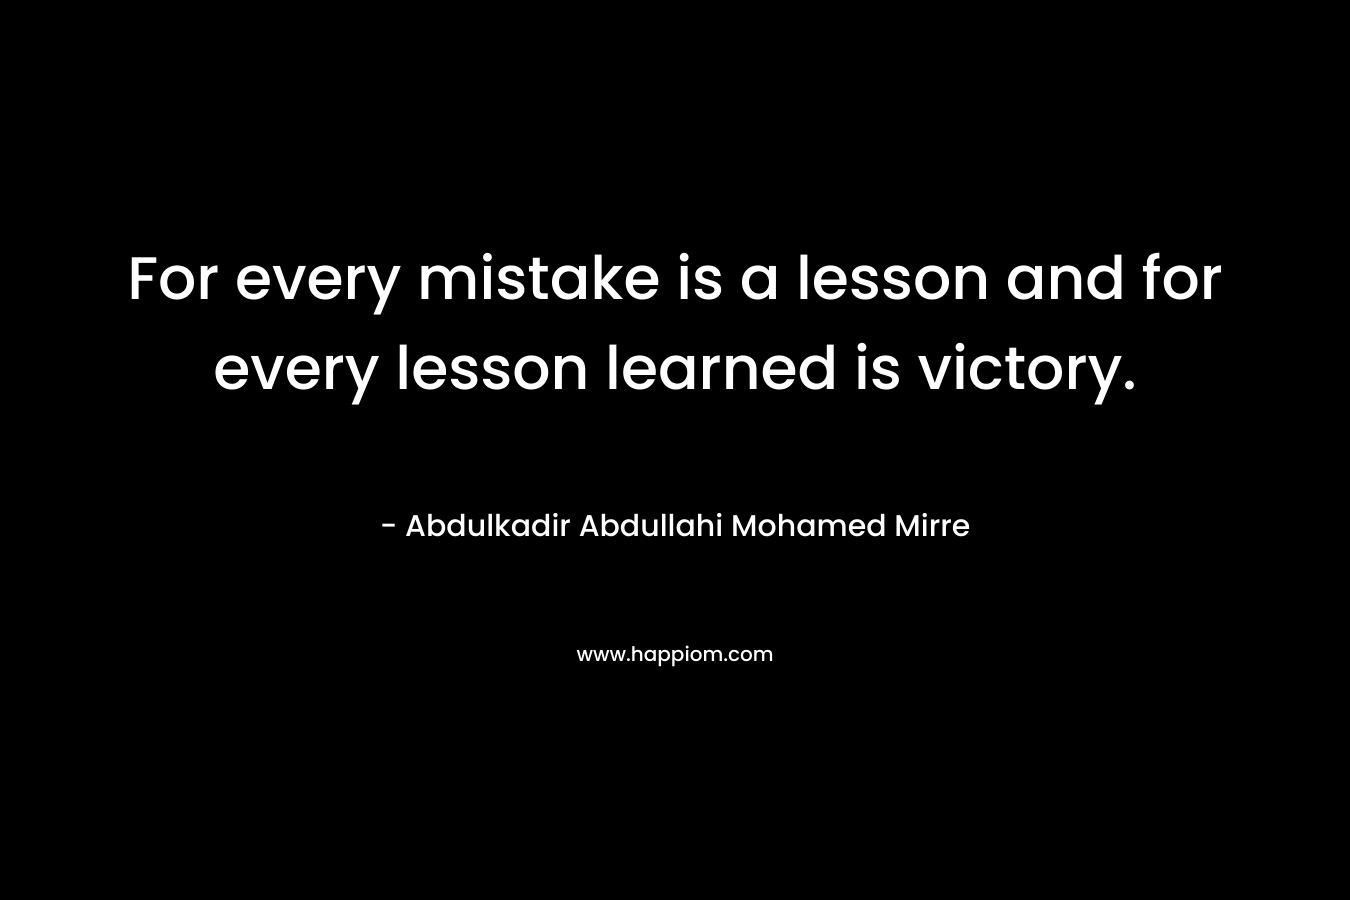 For every mistake is a lesson and for every lesson learned is victory.